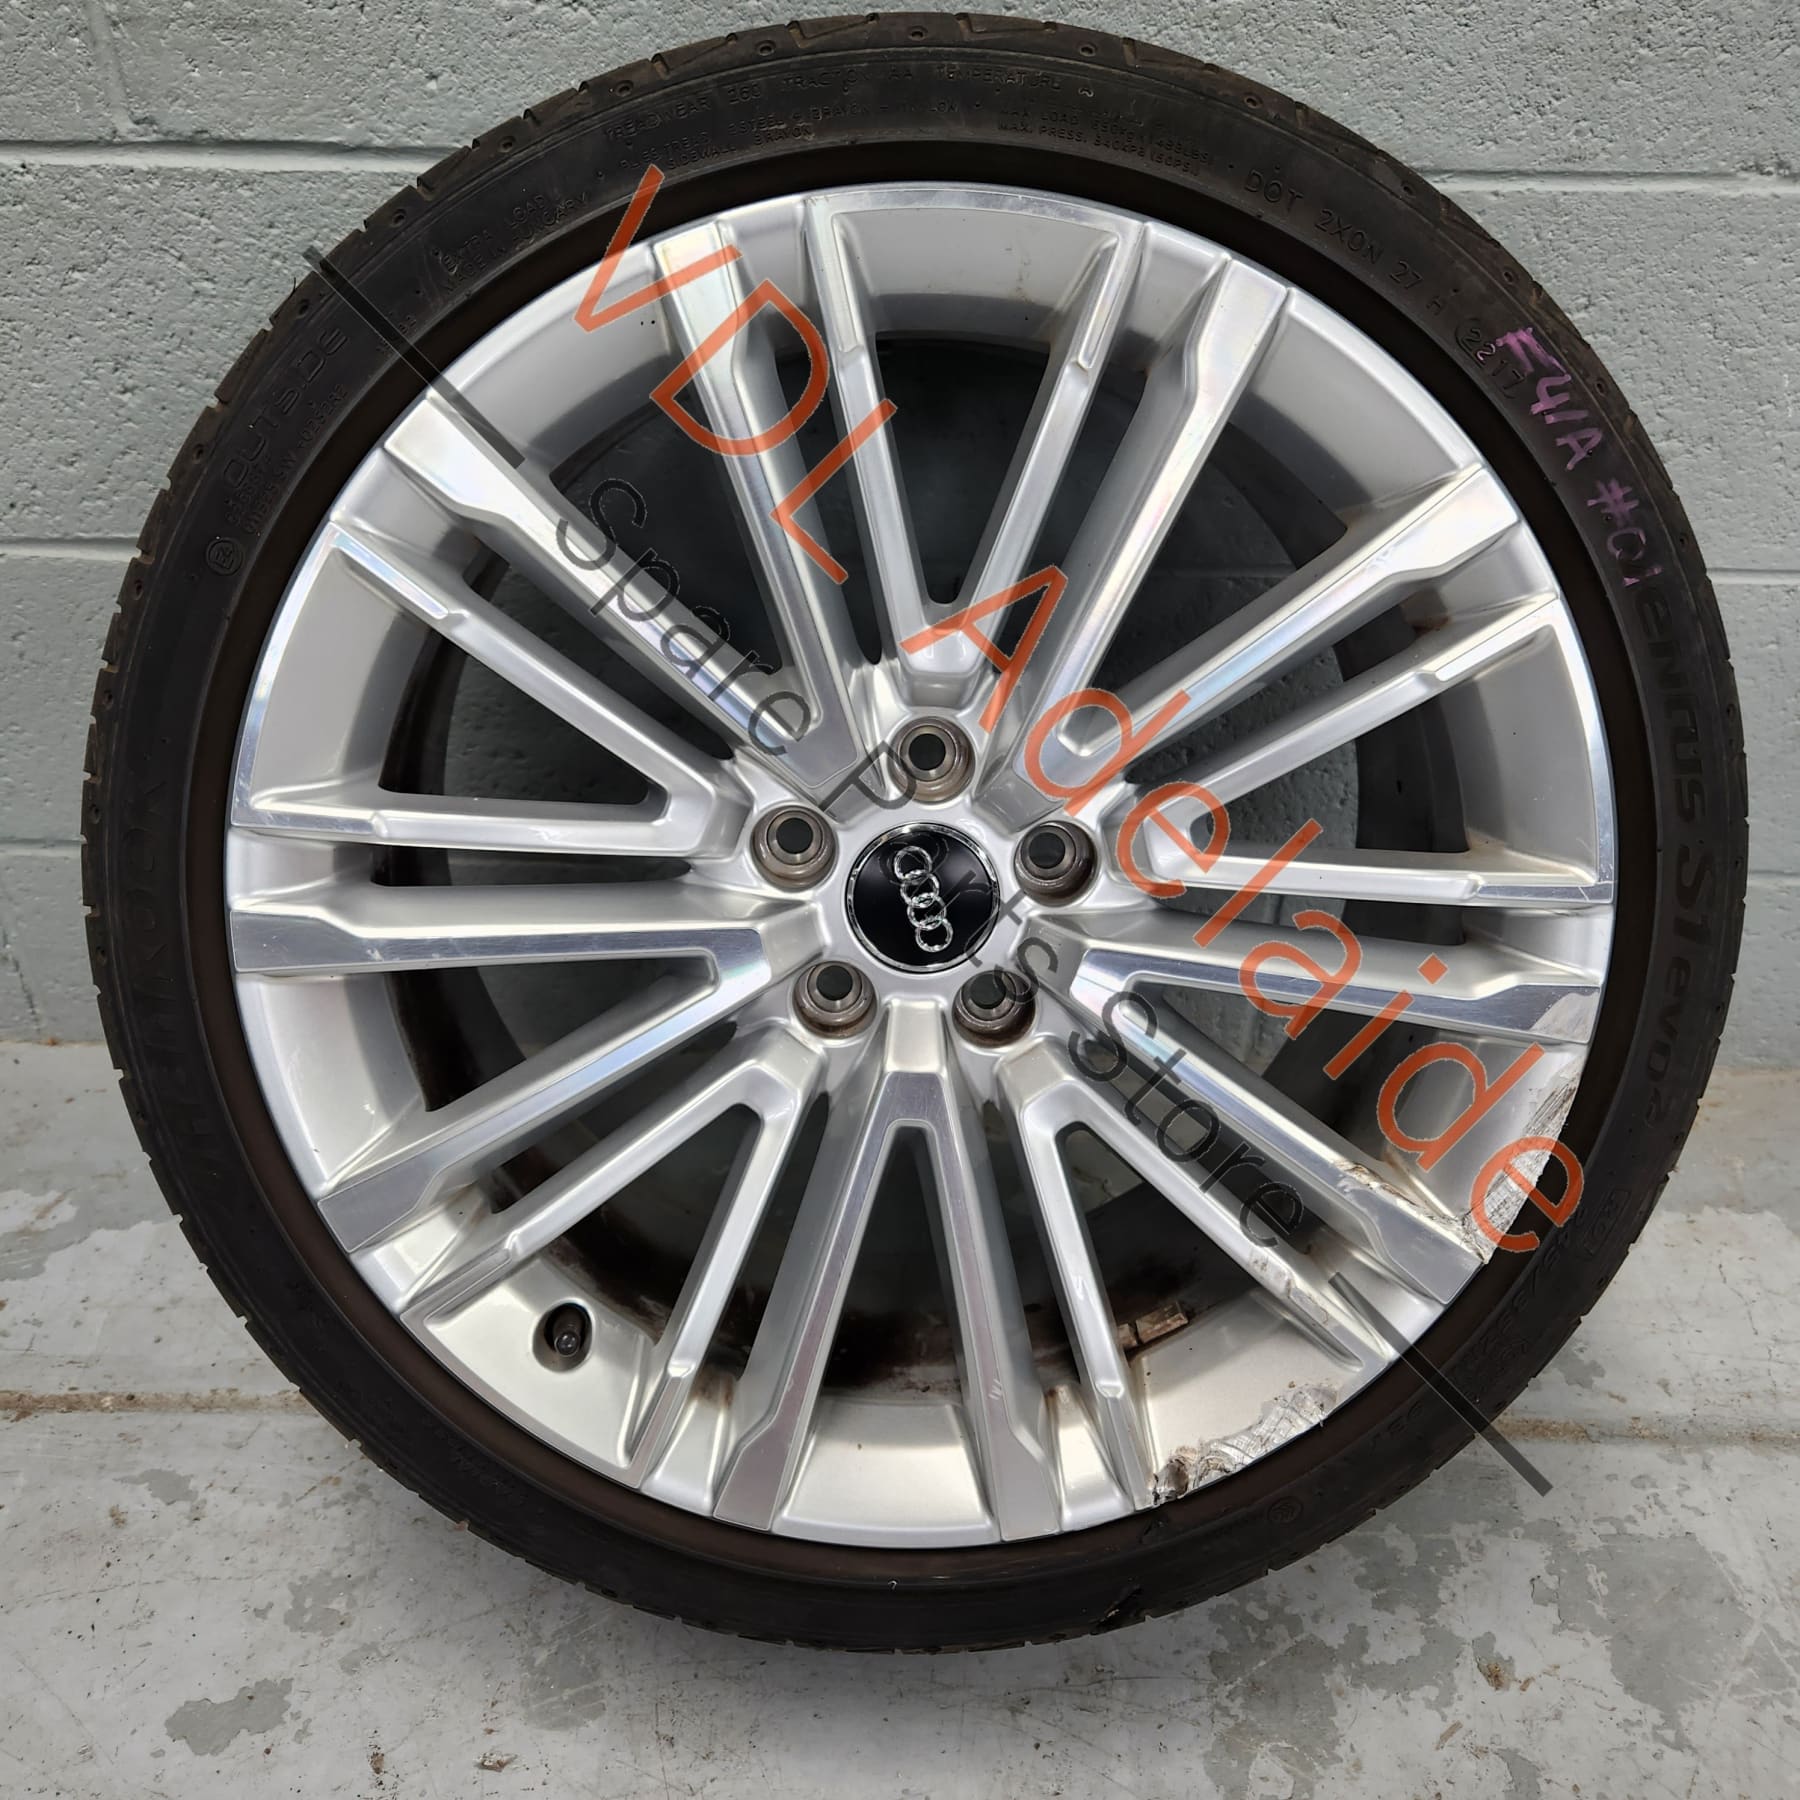 Audi - A4 Type B9 (Avant) Wheels and Tyre Packages